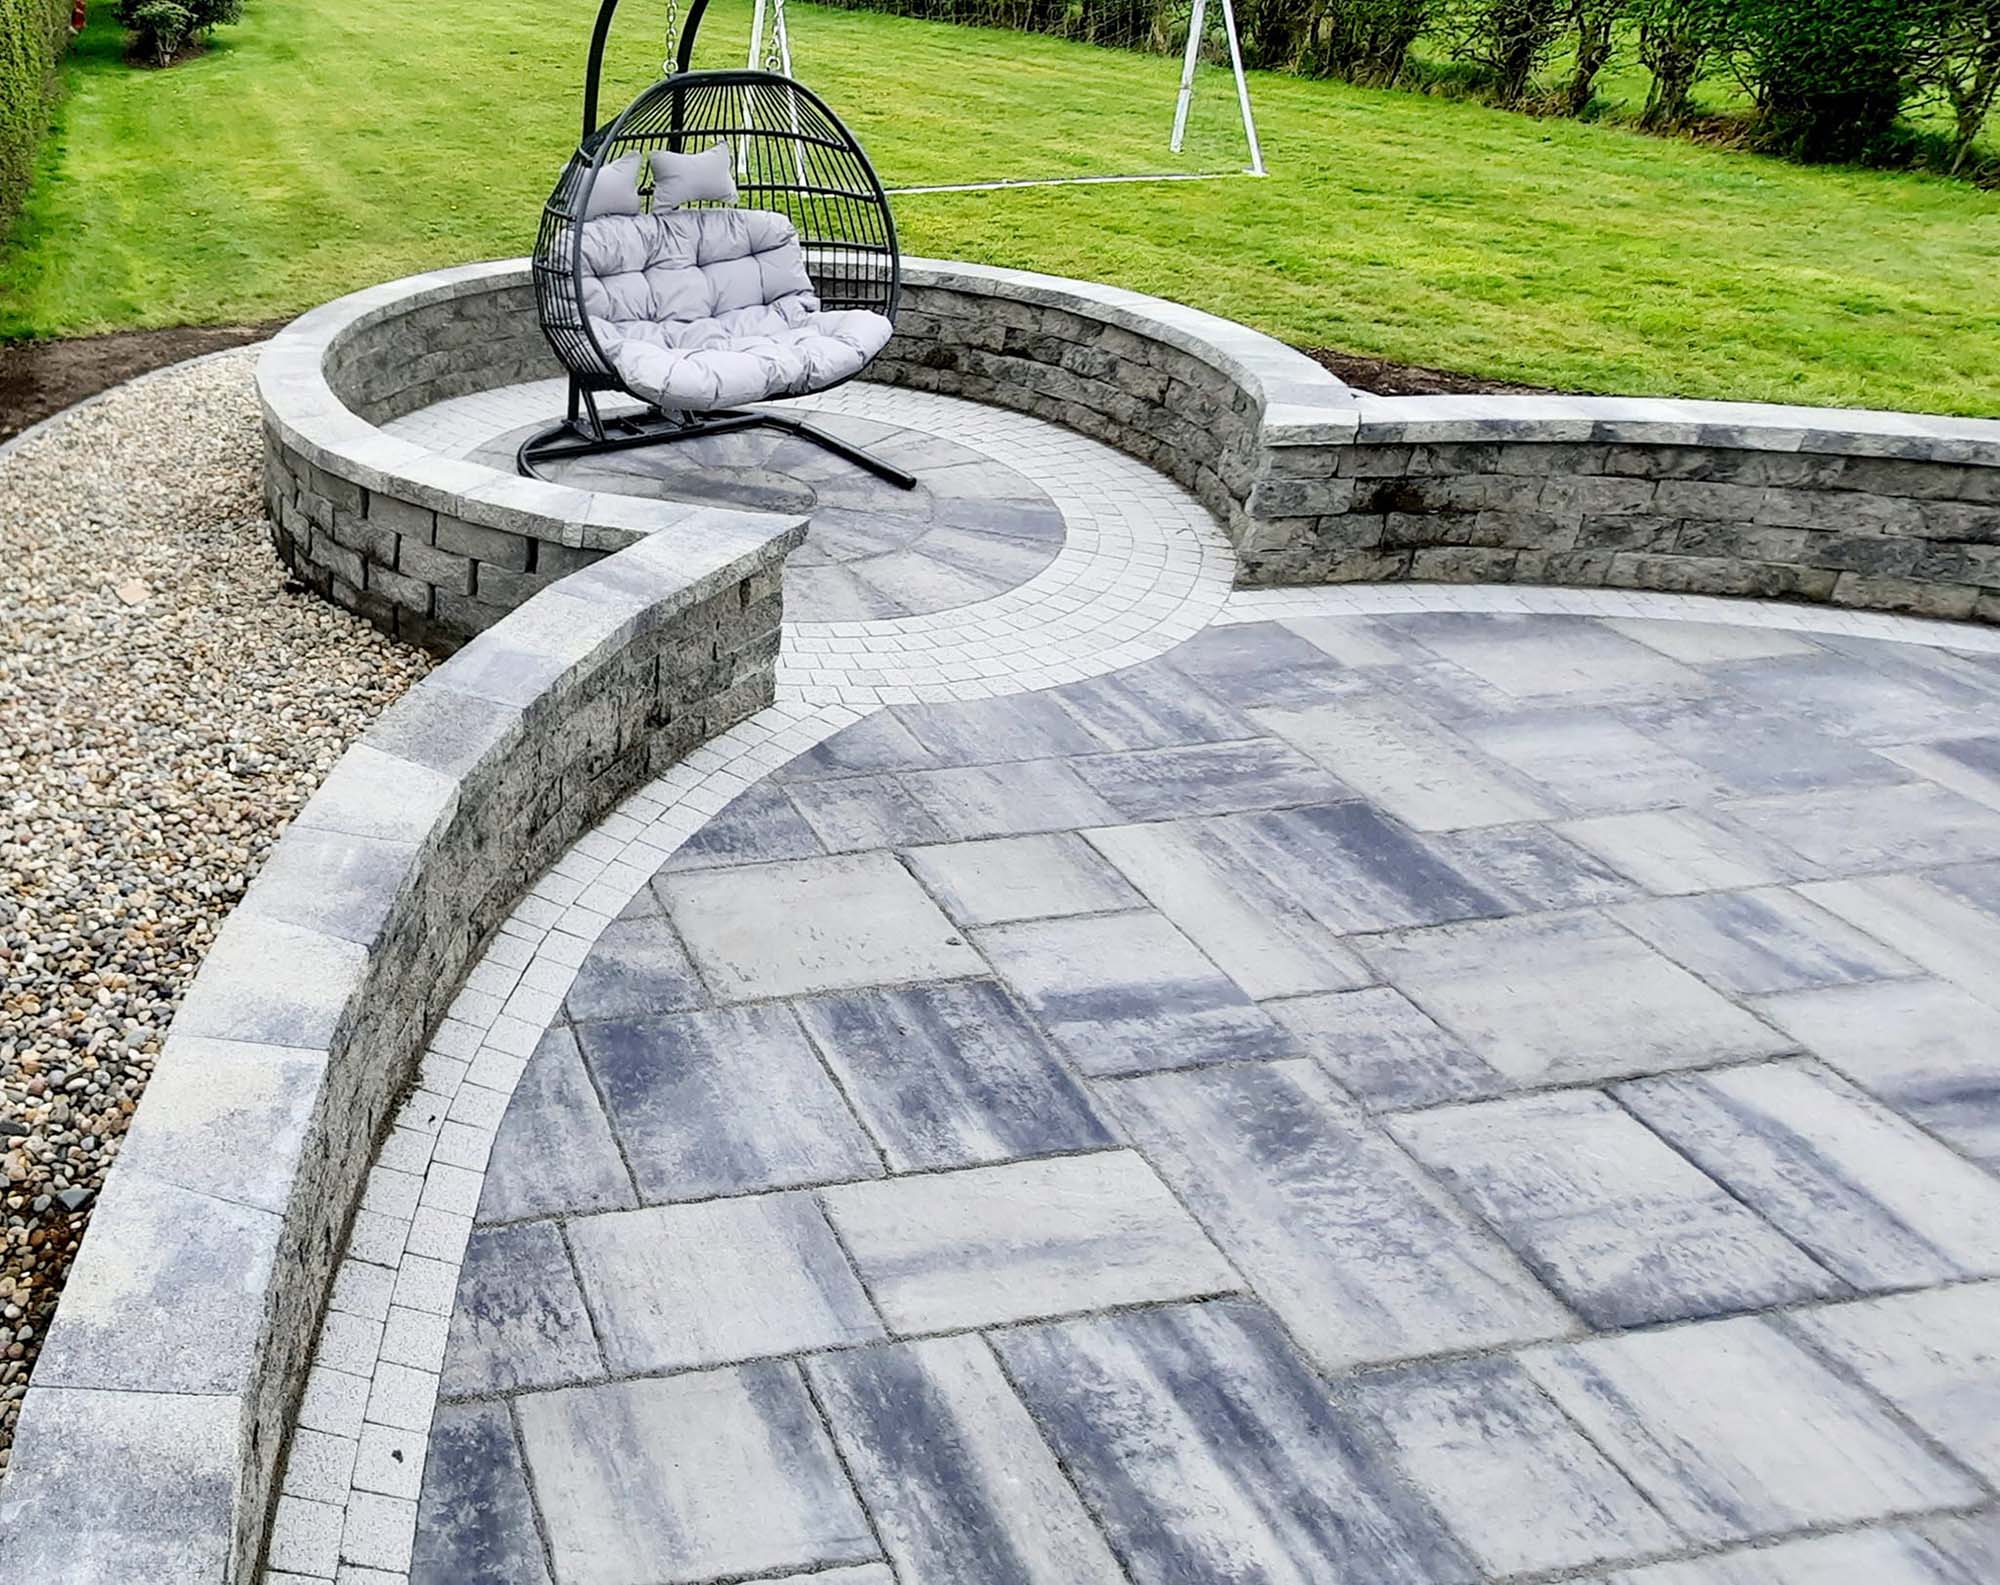 Circular patio with a stone border and a swinging chair in the middle